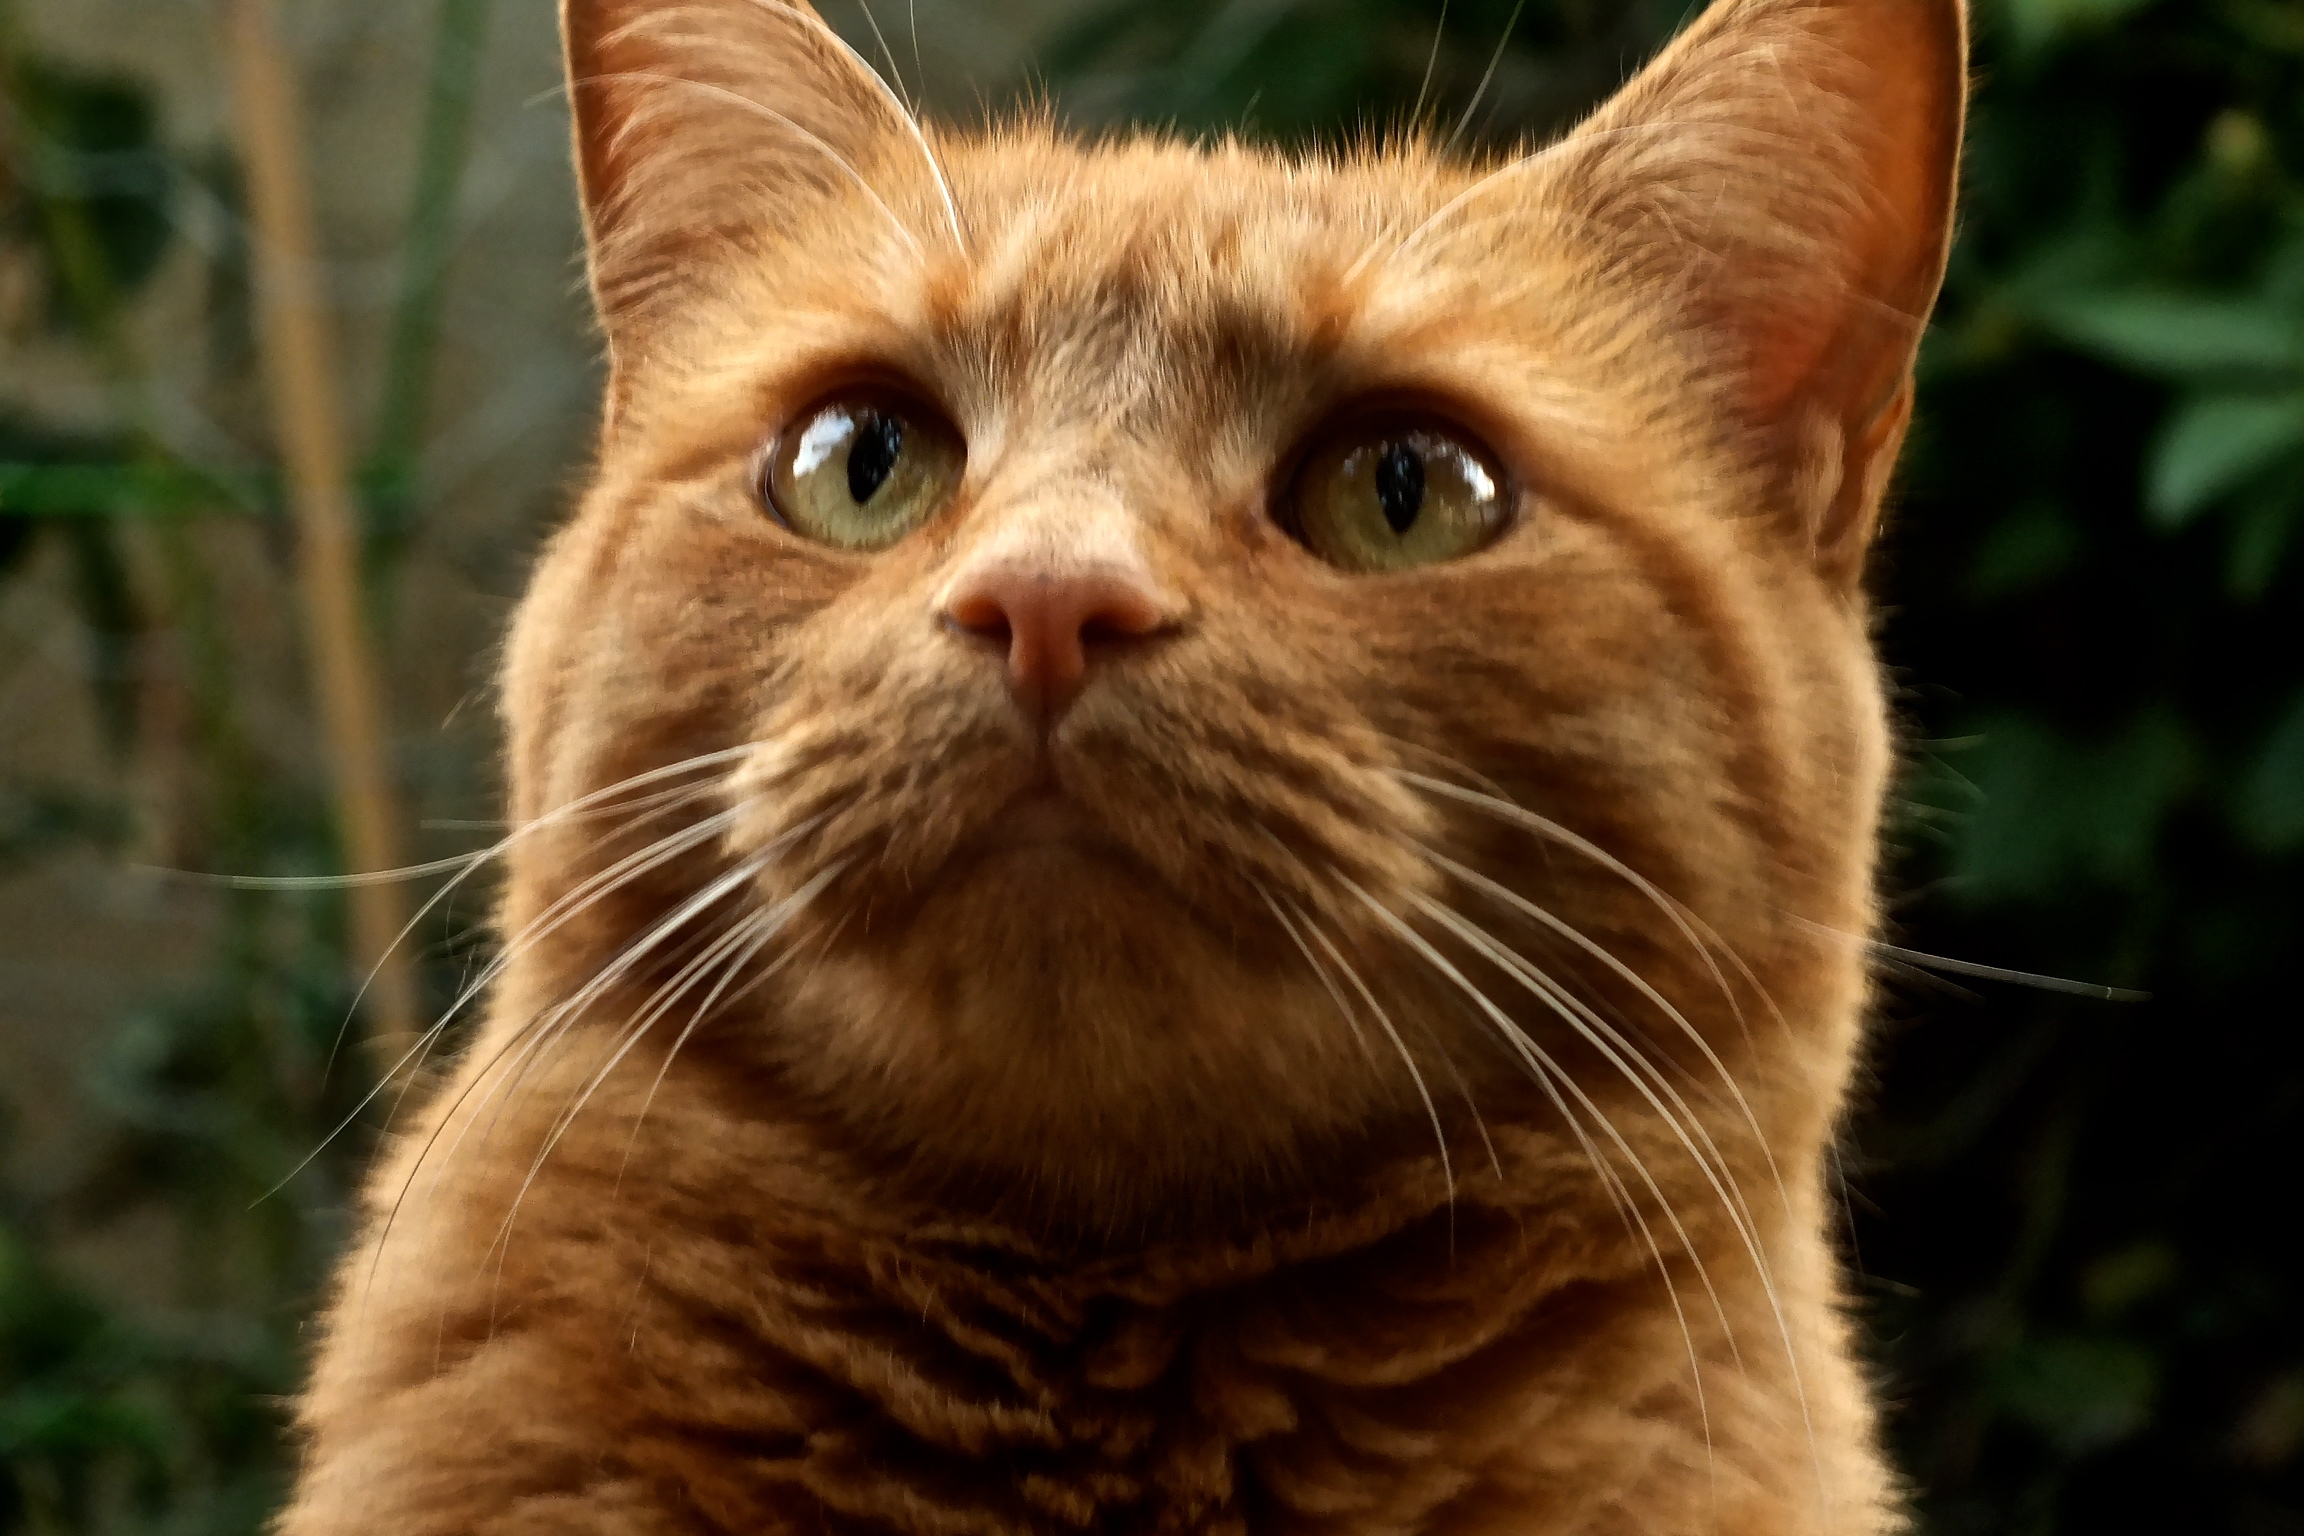 a close up of an orange cat looking straight ahead